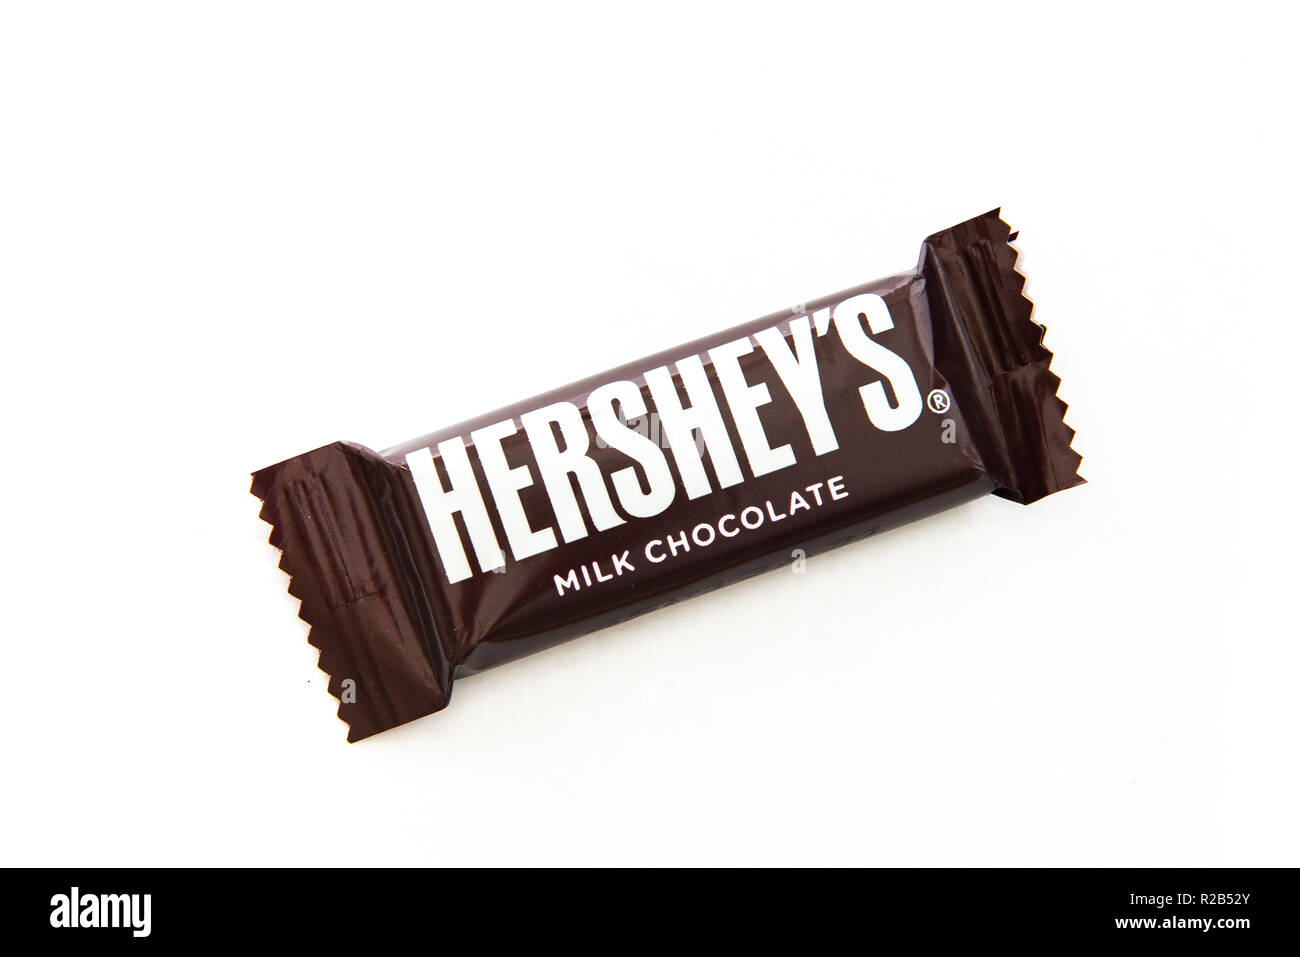 A snack size Hershey's milk chocolate bar isolated. Stock Photo